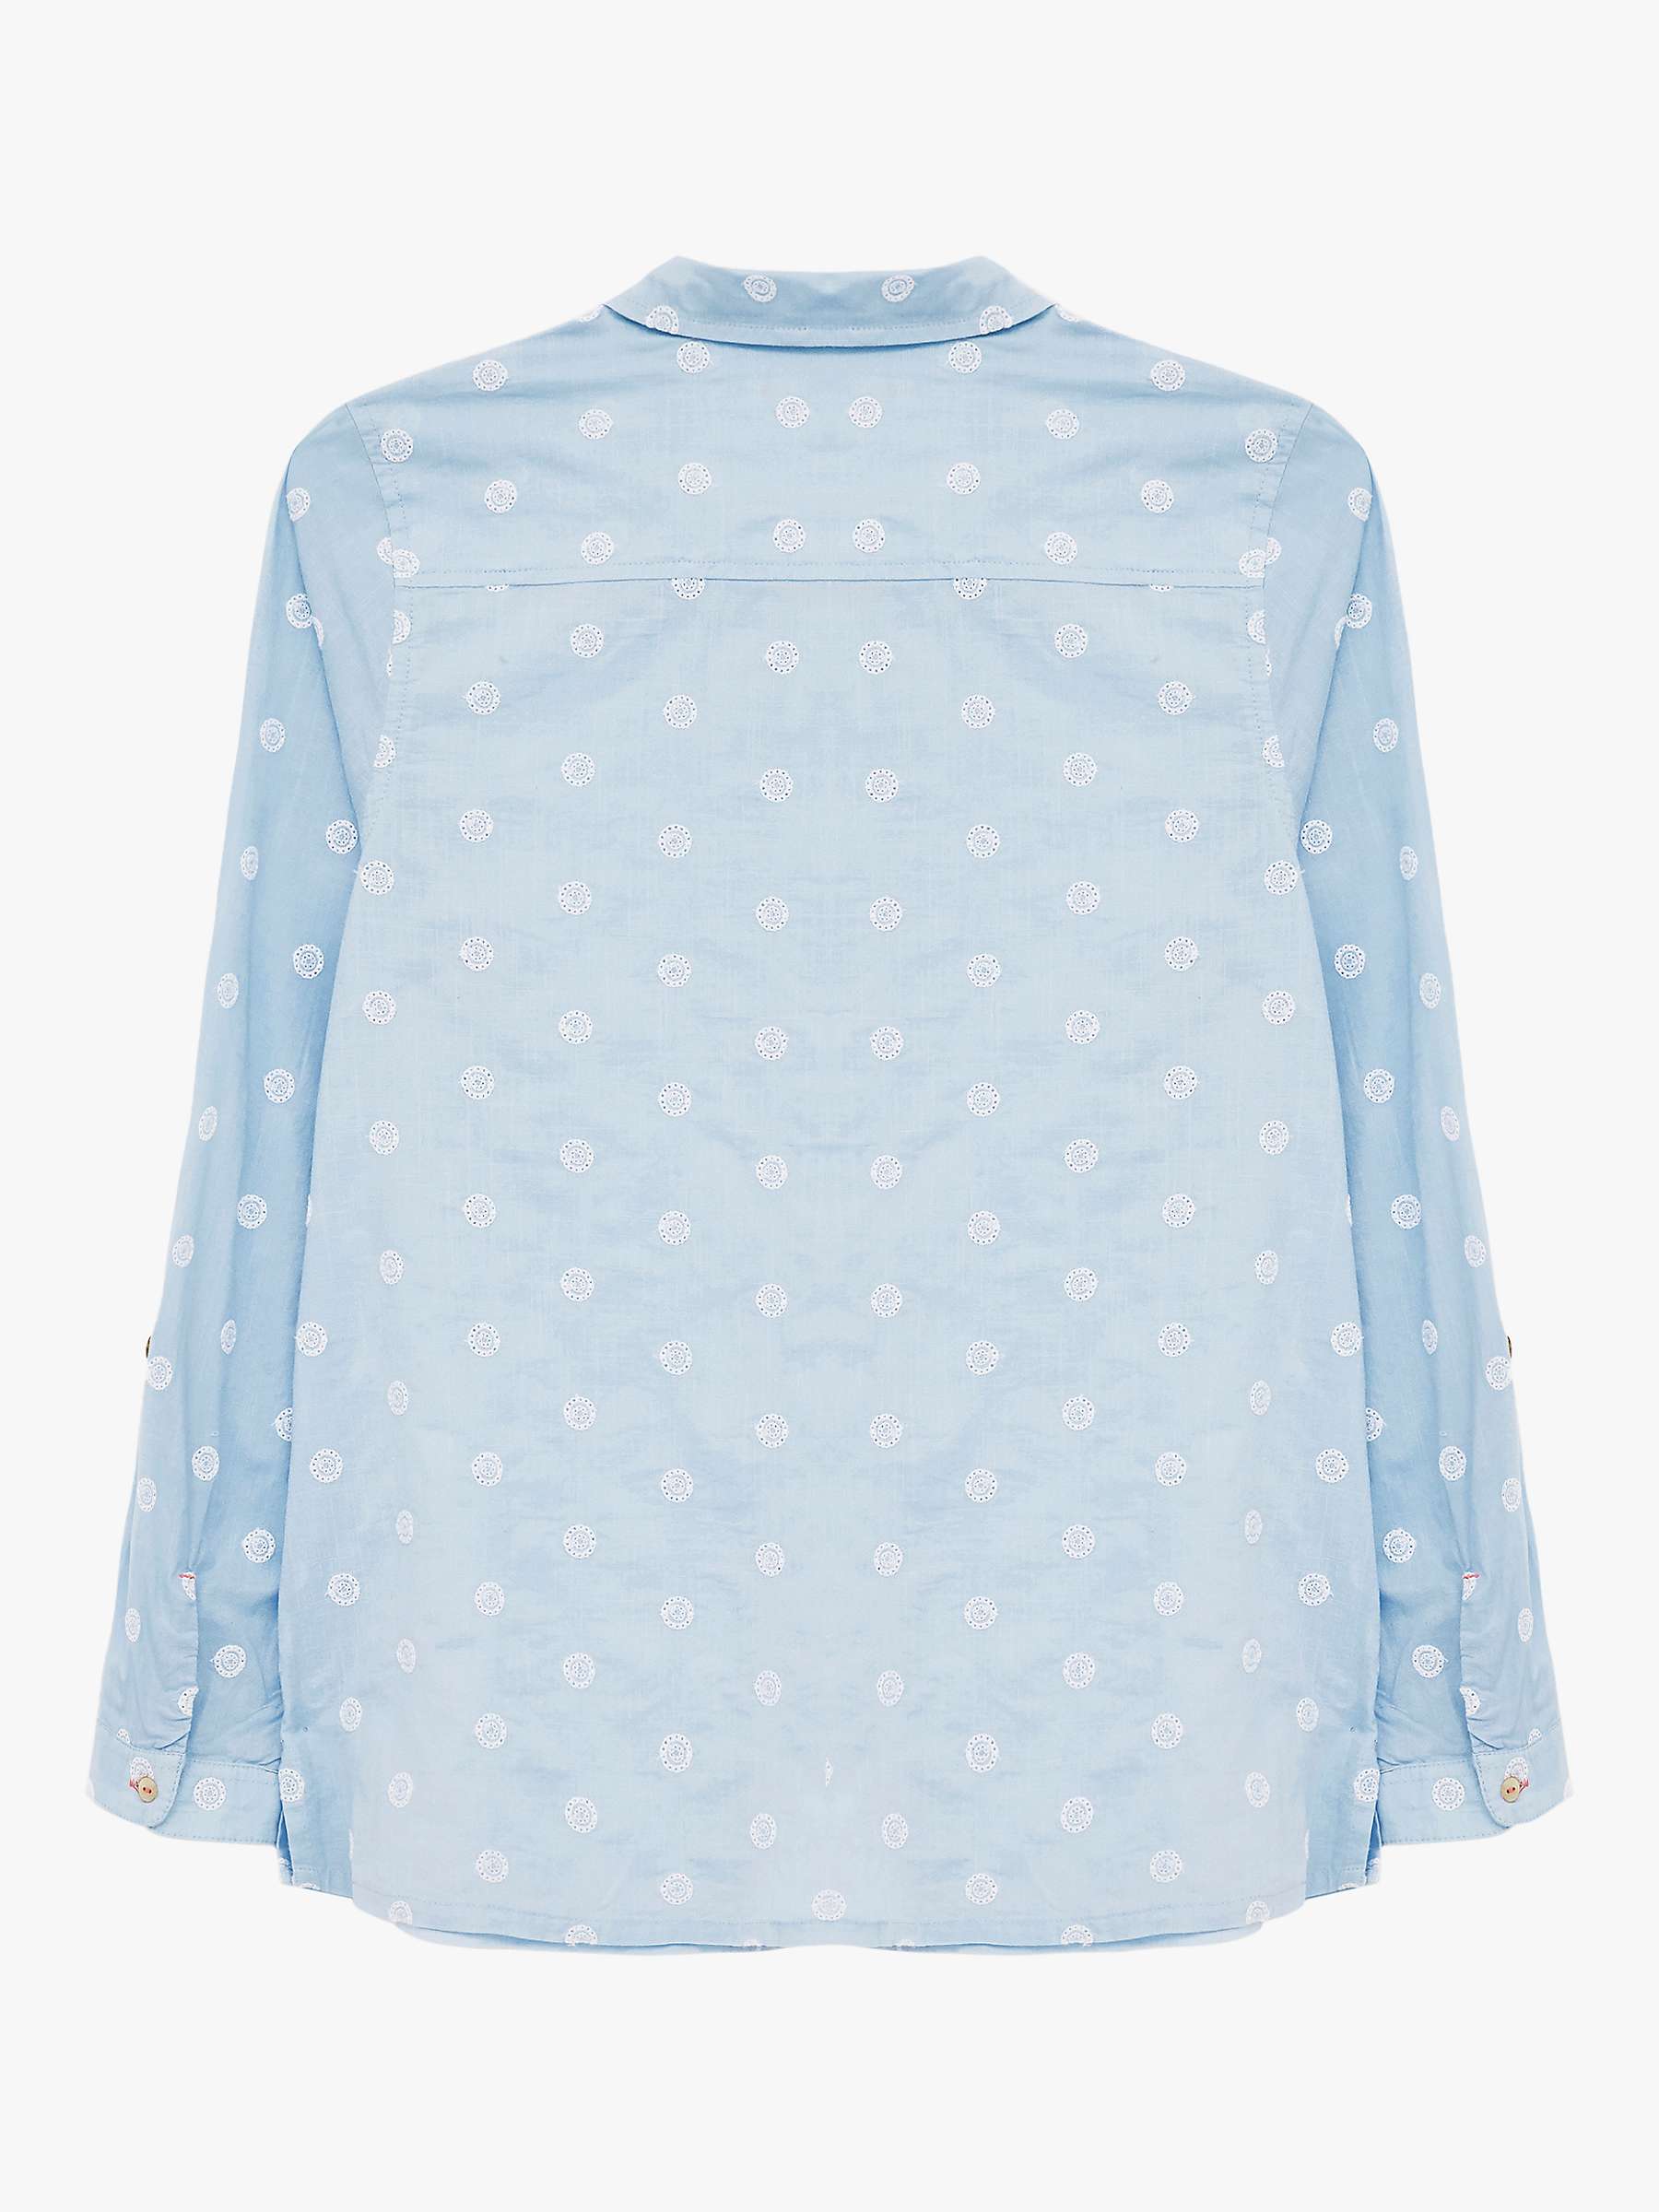 Buy White Stuff Emily Embroidered Shirt Online at johnlewis.com